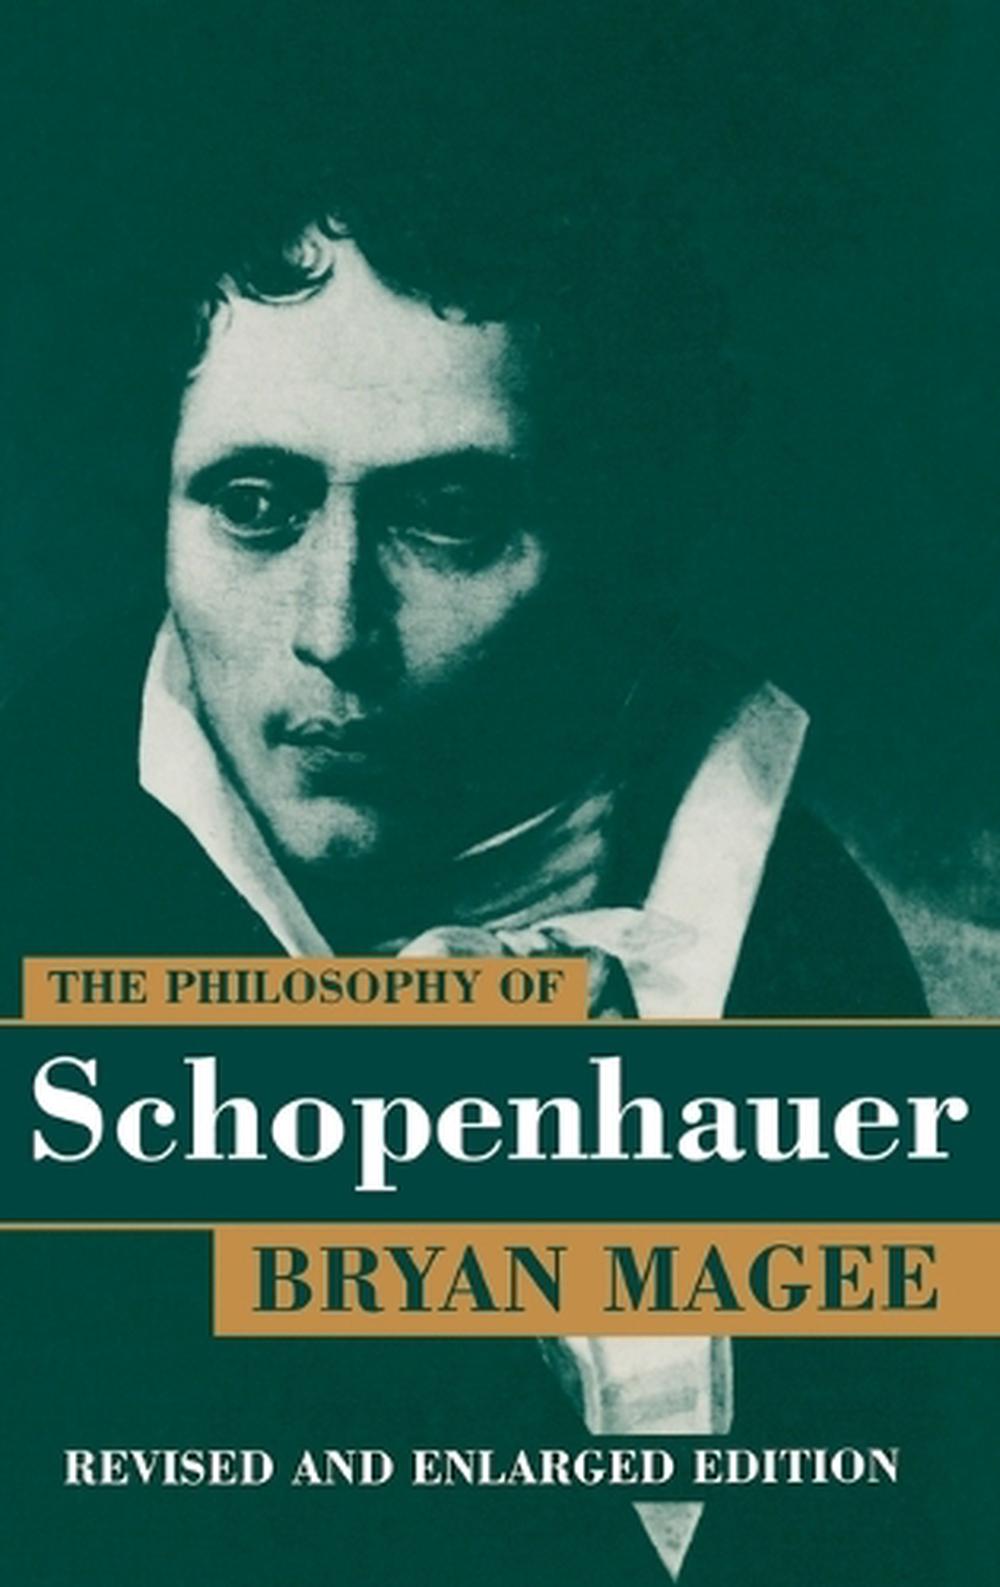 the philosophy of schopenhauer by bryan magee